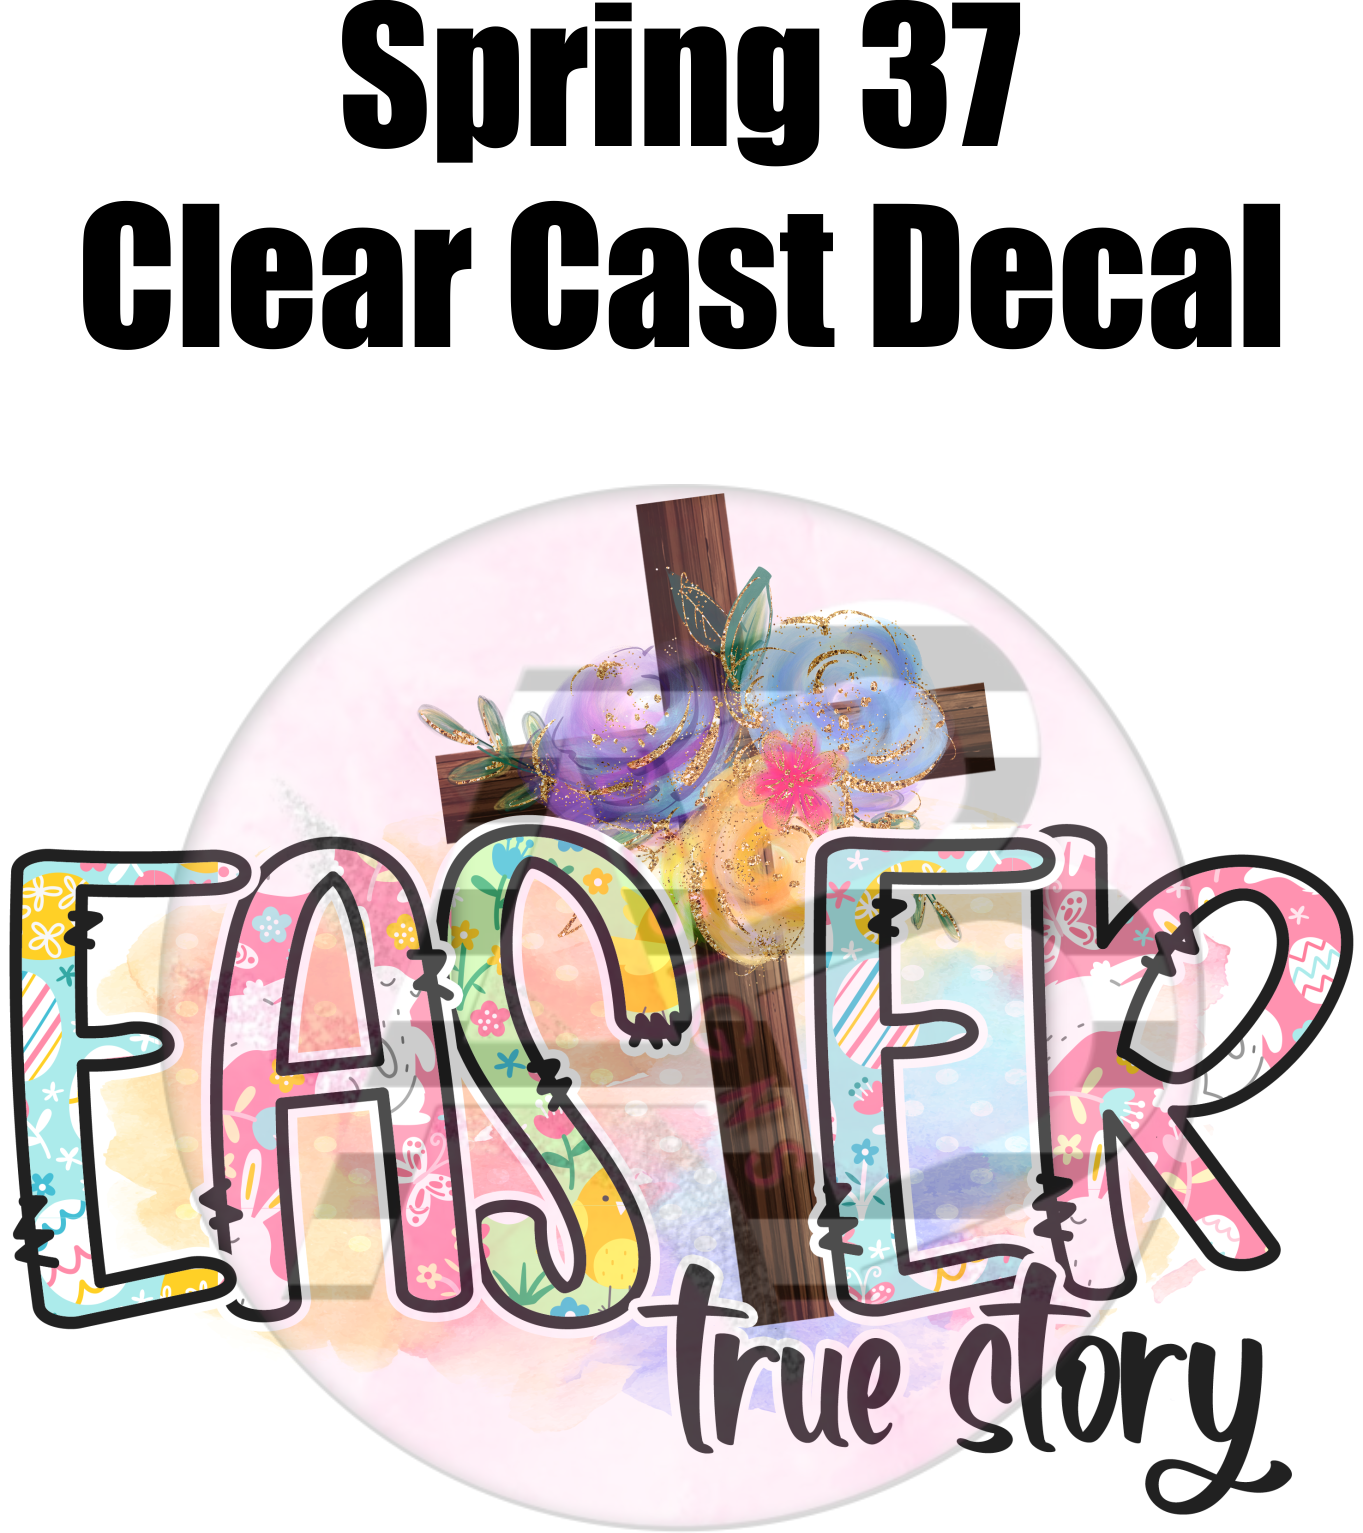 Spring 37 - Clear Cast Decal